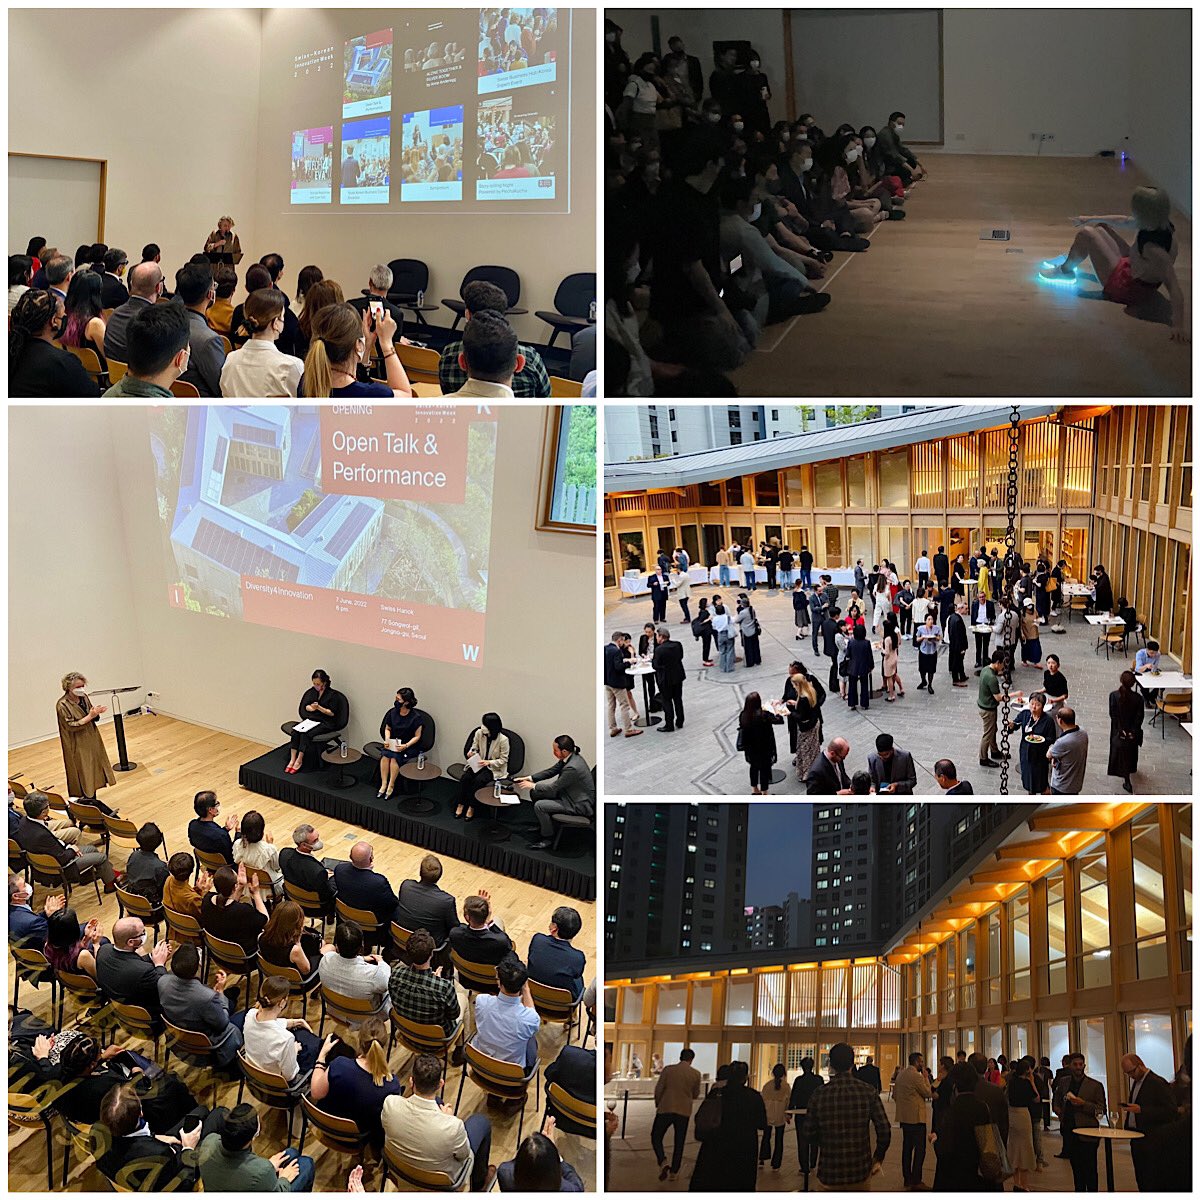 Great to have welcomed all to the Opening of 🇨🇭-🇰🇷_Innovation_Week. Thanks to the panelists & audience for interesting discussion and also to @AnnaAnderegg for wonderful performance and @barottimarco for sound design. Stay tuned with us for many events this week! #diversity